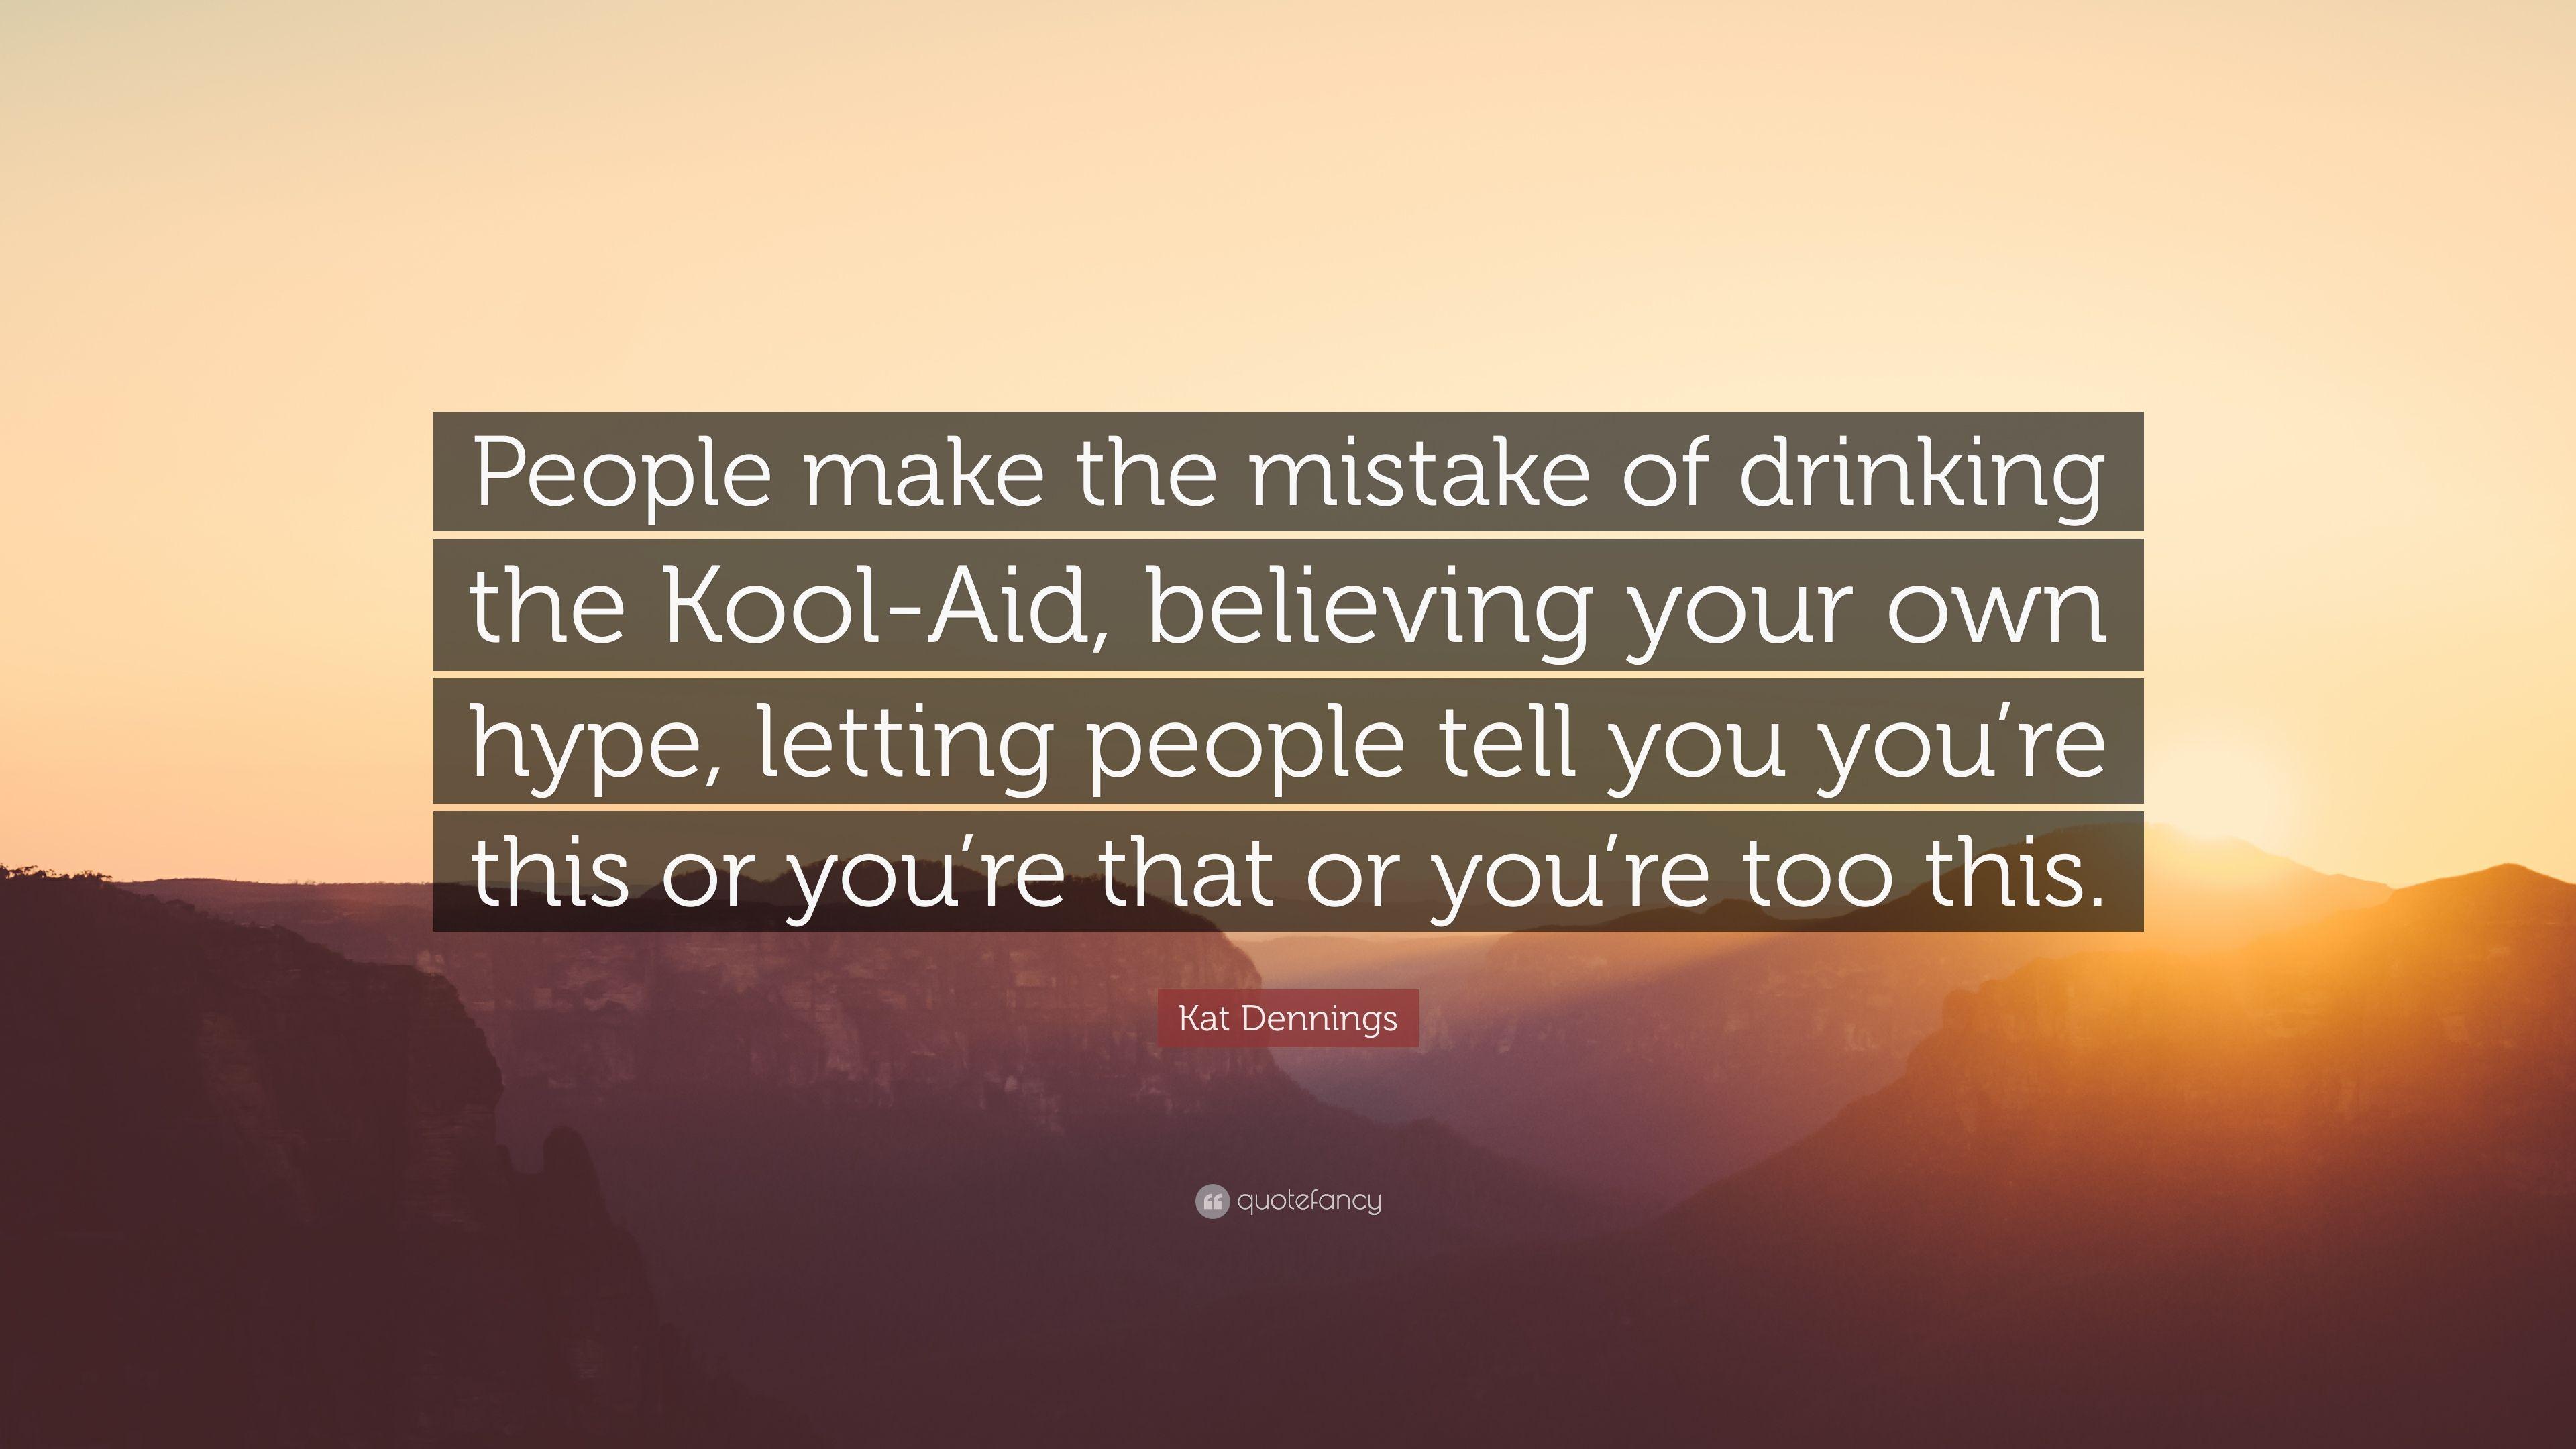 Kat Dennings Quote: “People make the mistake of drinking the Kool